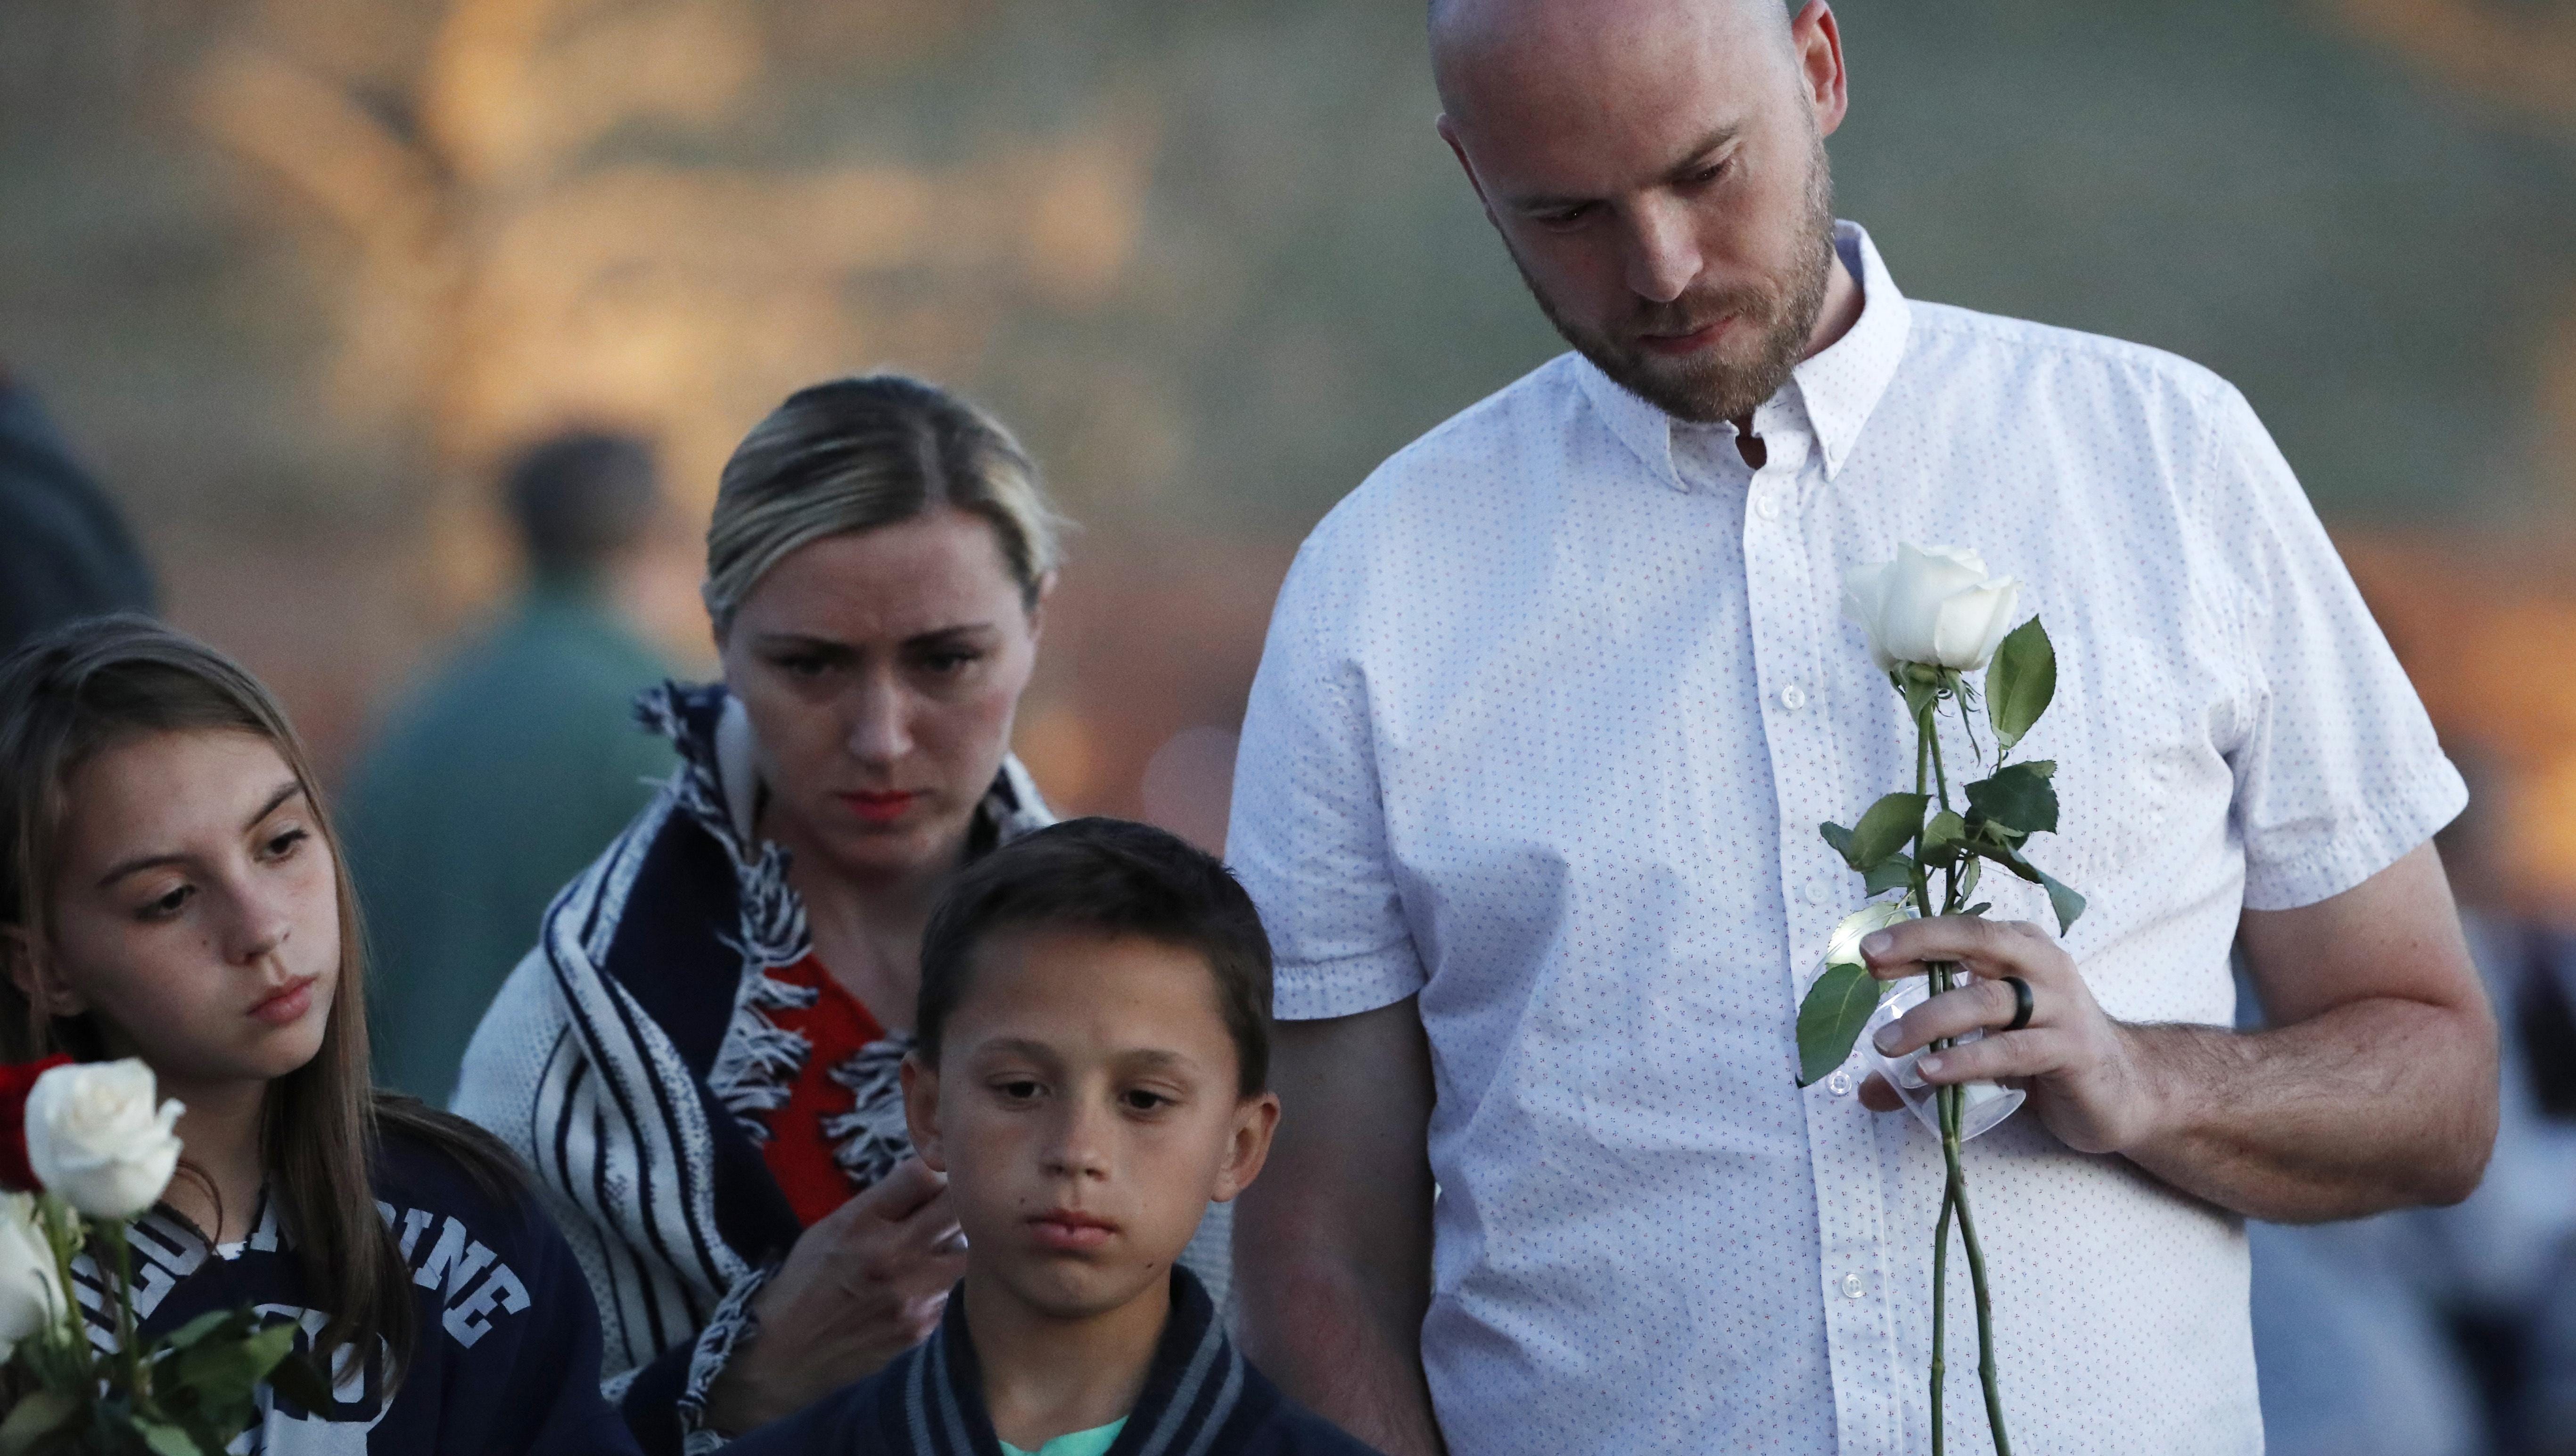 Will Beck, right, who escaped during the shooting attack nearly 20 years ago, joins his family during a vigil at the memorial for the victims of the massacre Friday, April 19, 2019, in Littleton, Colo.